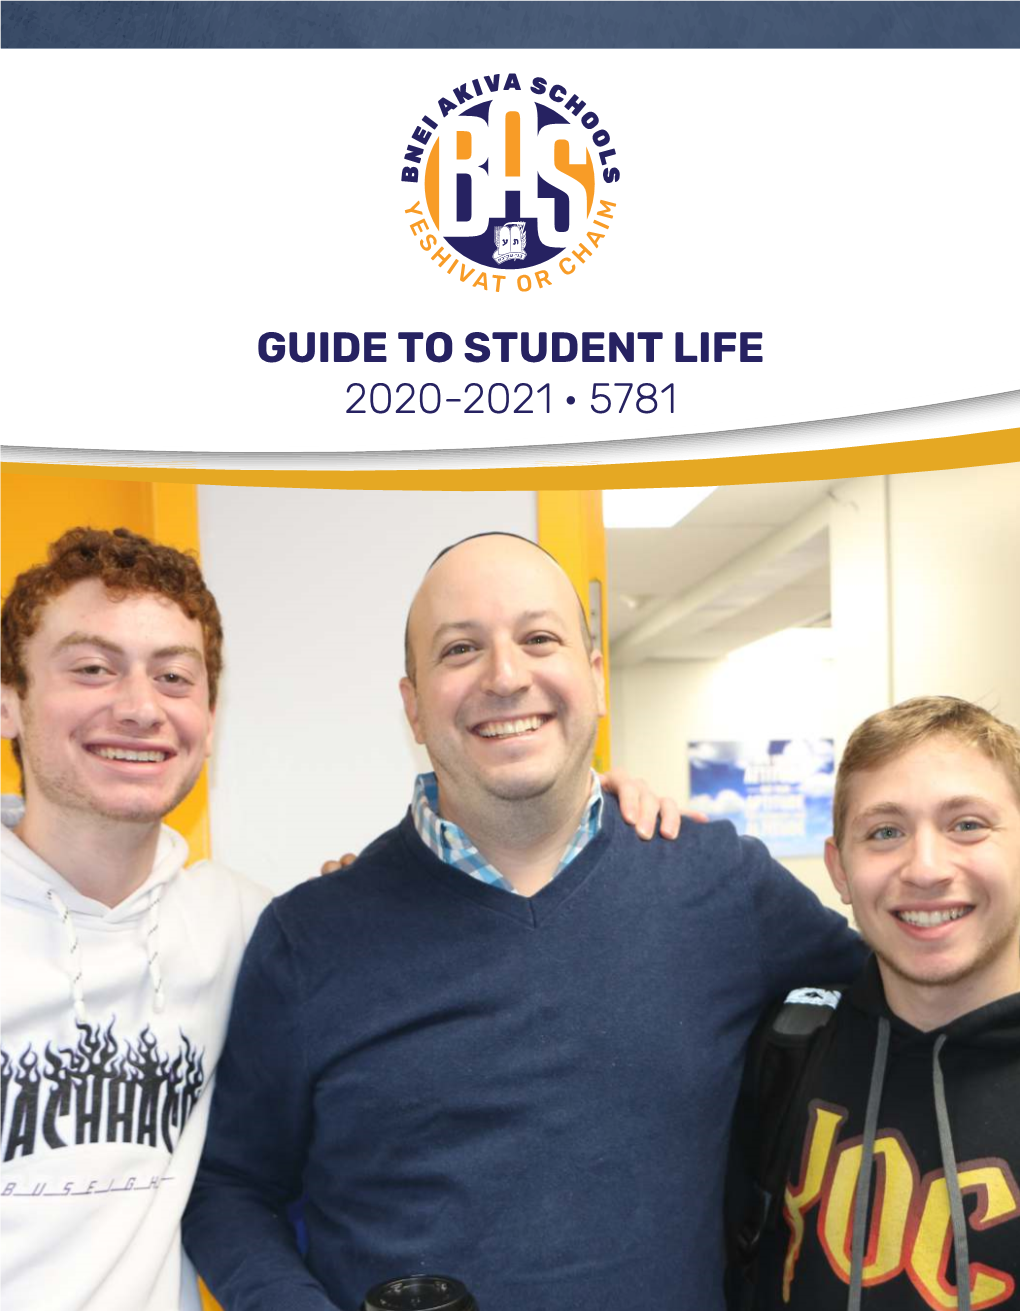 GUIDE to STUDENT LIFE 2020-2021 · 5781 a Student’S Experience at Yeshivat Or Chaim Extends Well Beyond the Classroom